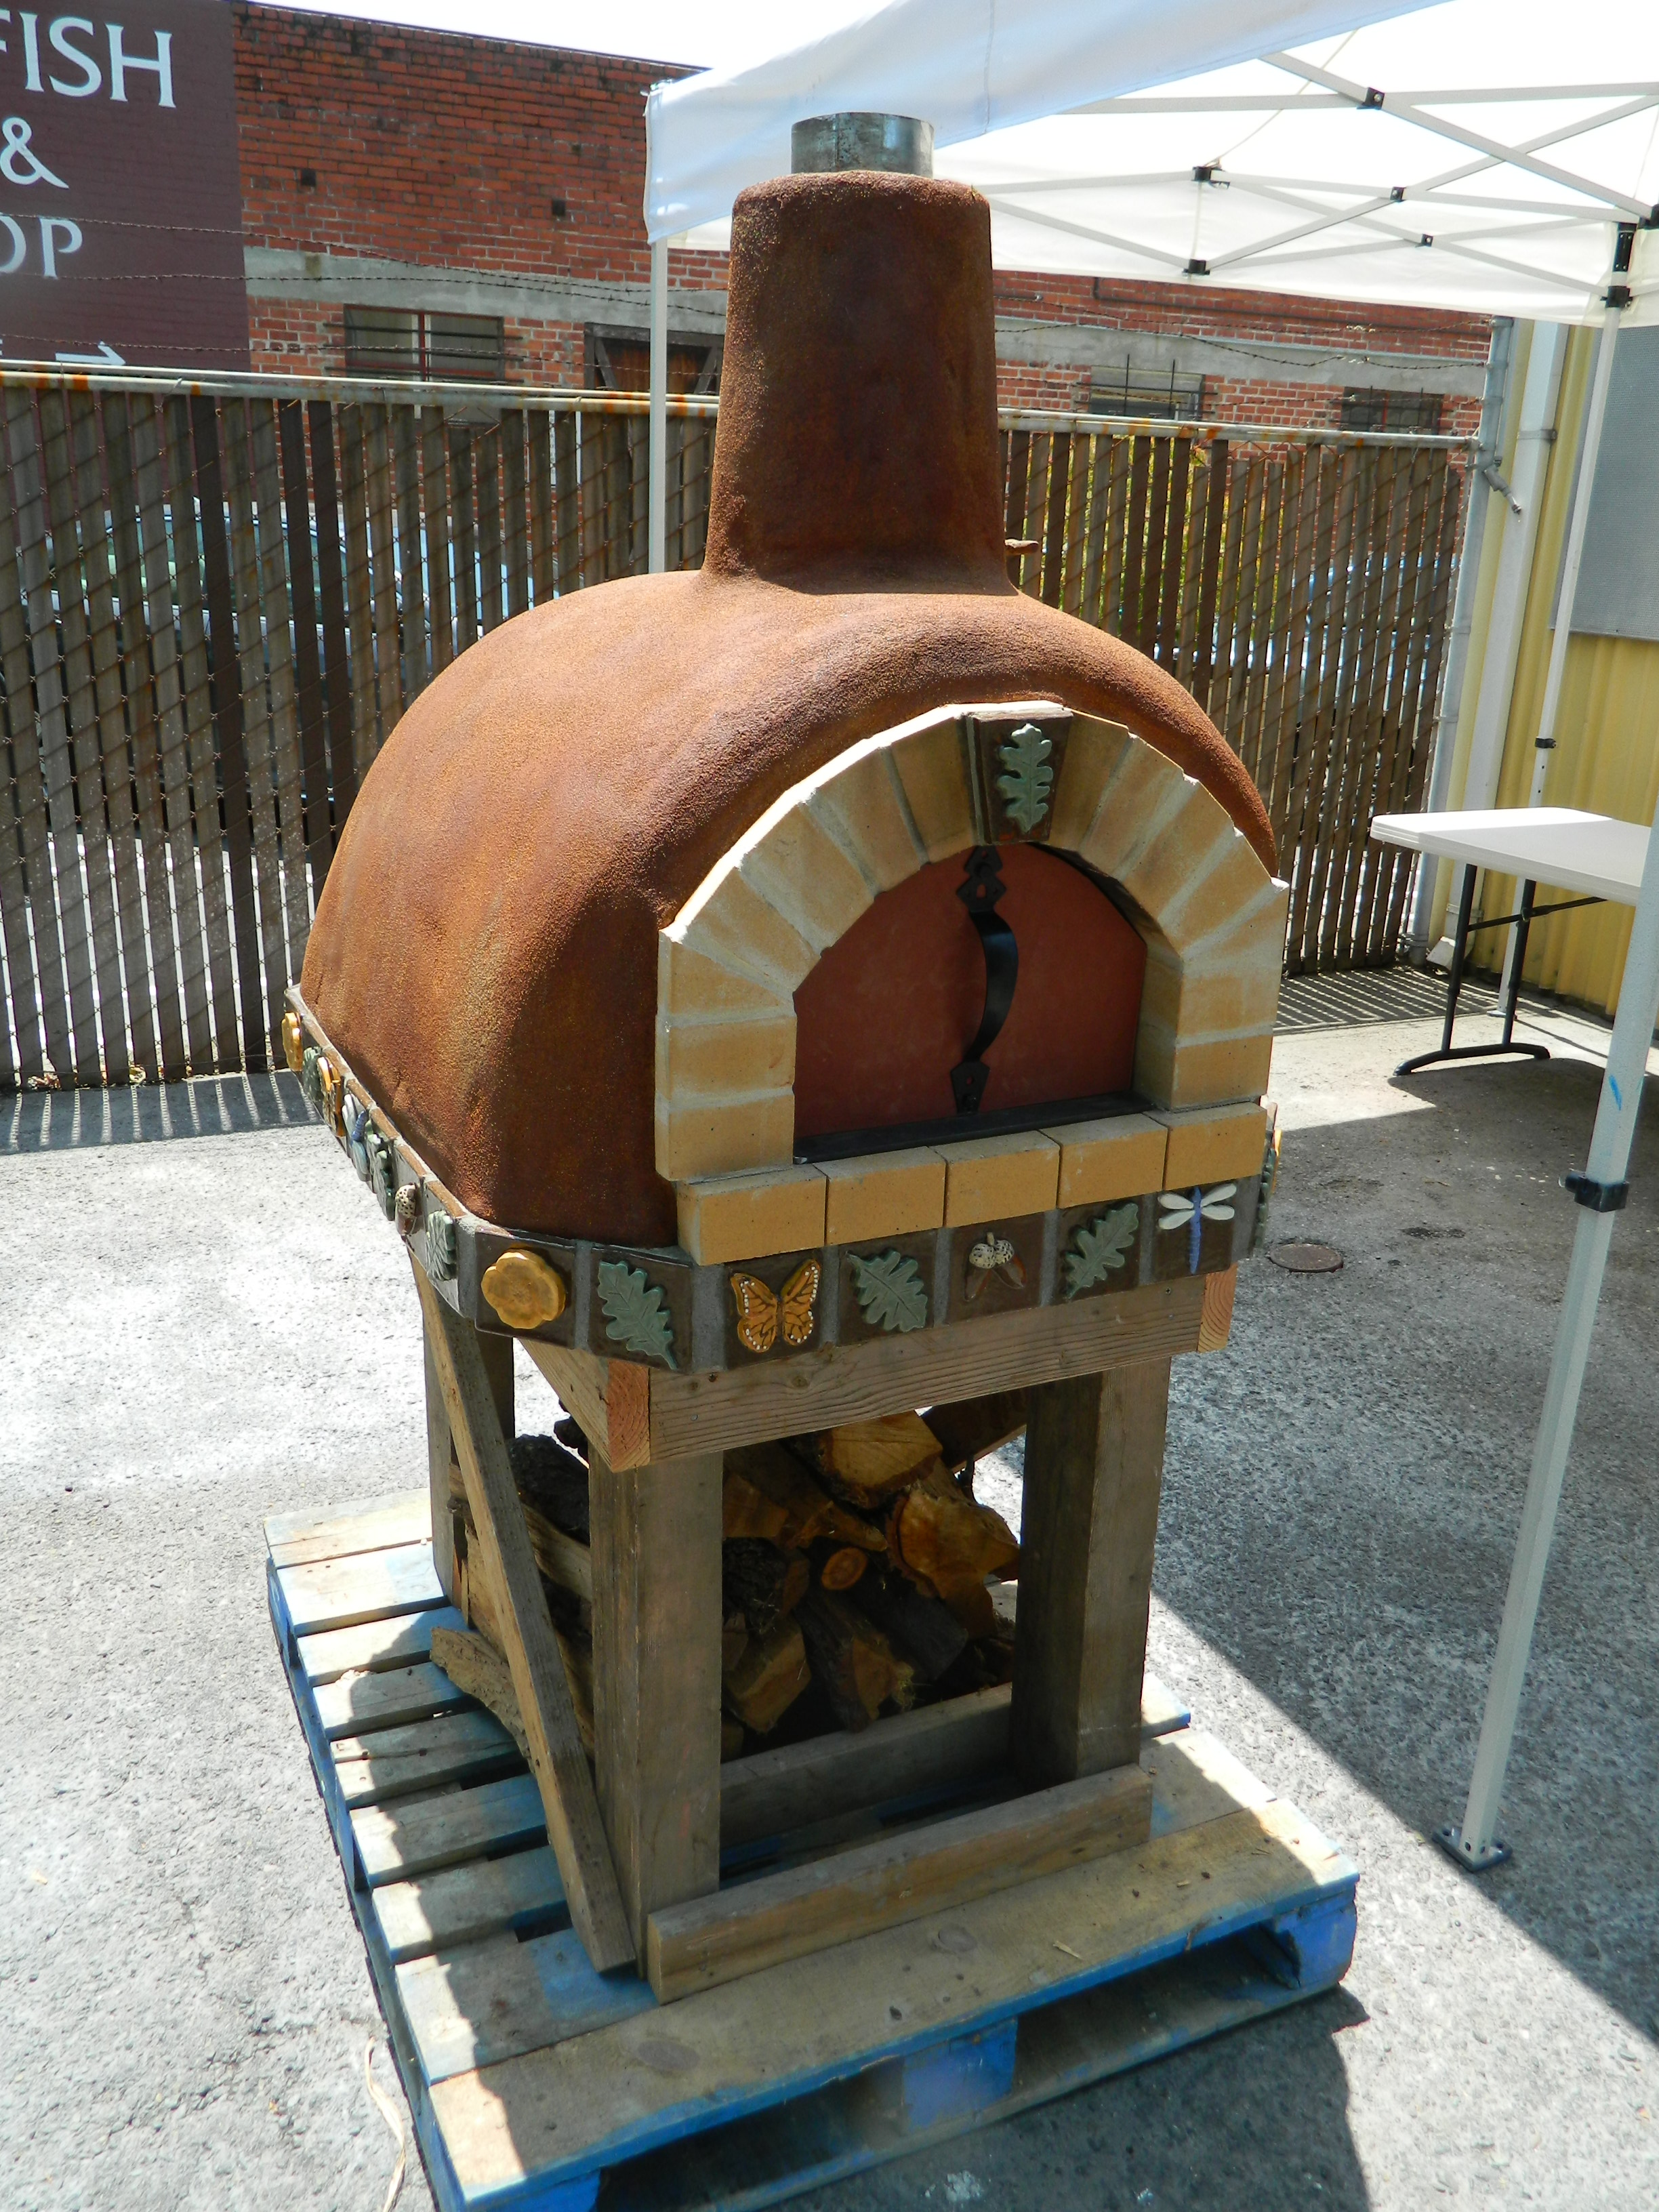  Wood-fired ovens are an exciting mix of form and function, and an irresistible  focal point around which to gather friends and community!  “California Craftsman Oven” 2013 